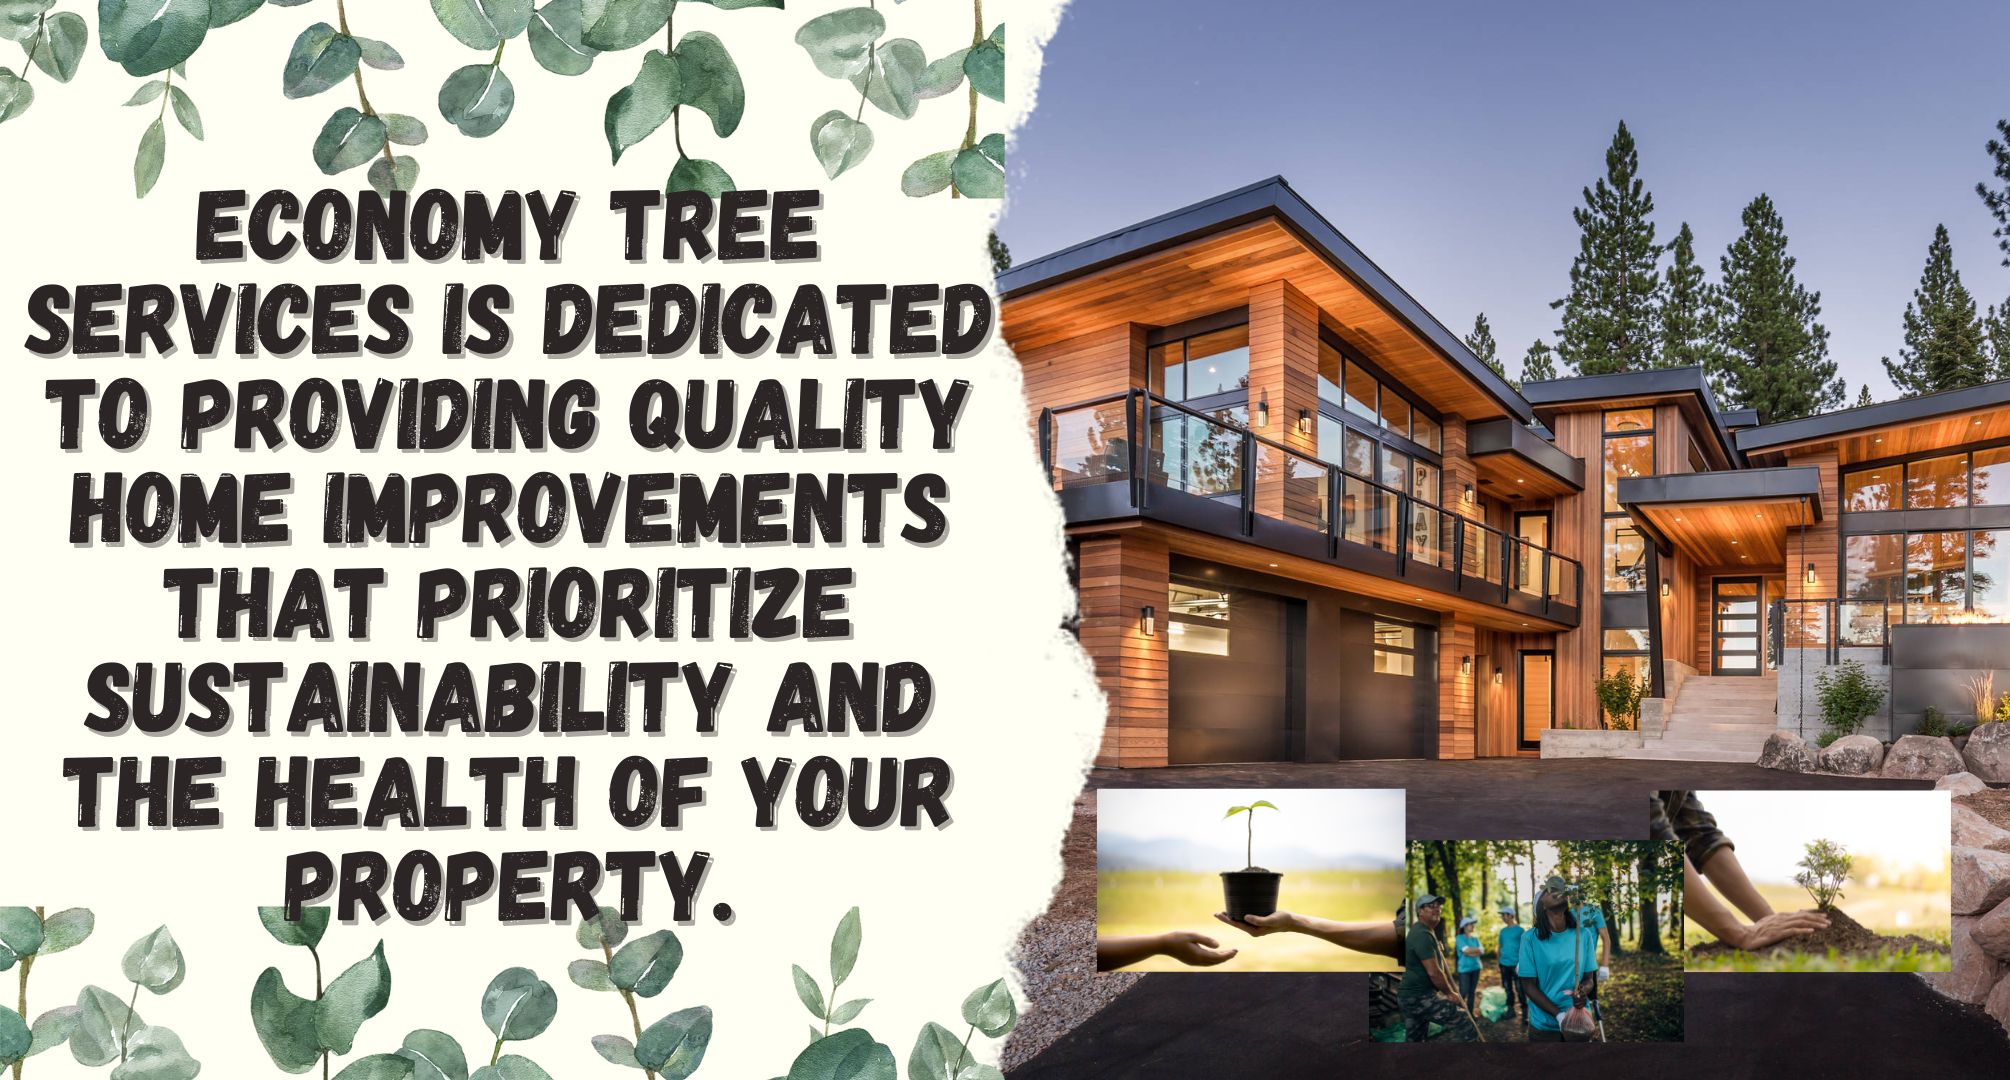 Experience Quality and Environmentally-Friendly Home Improvements with Economy Tree Services